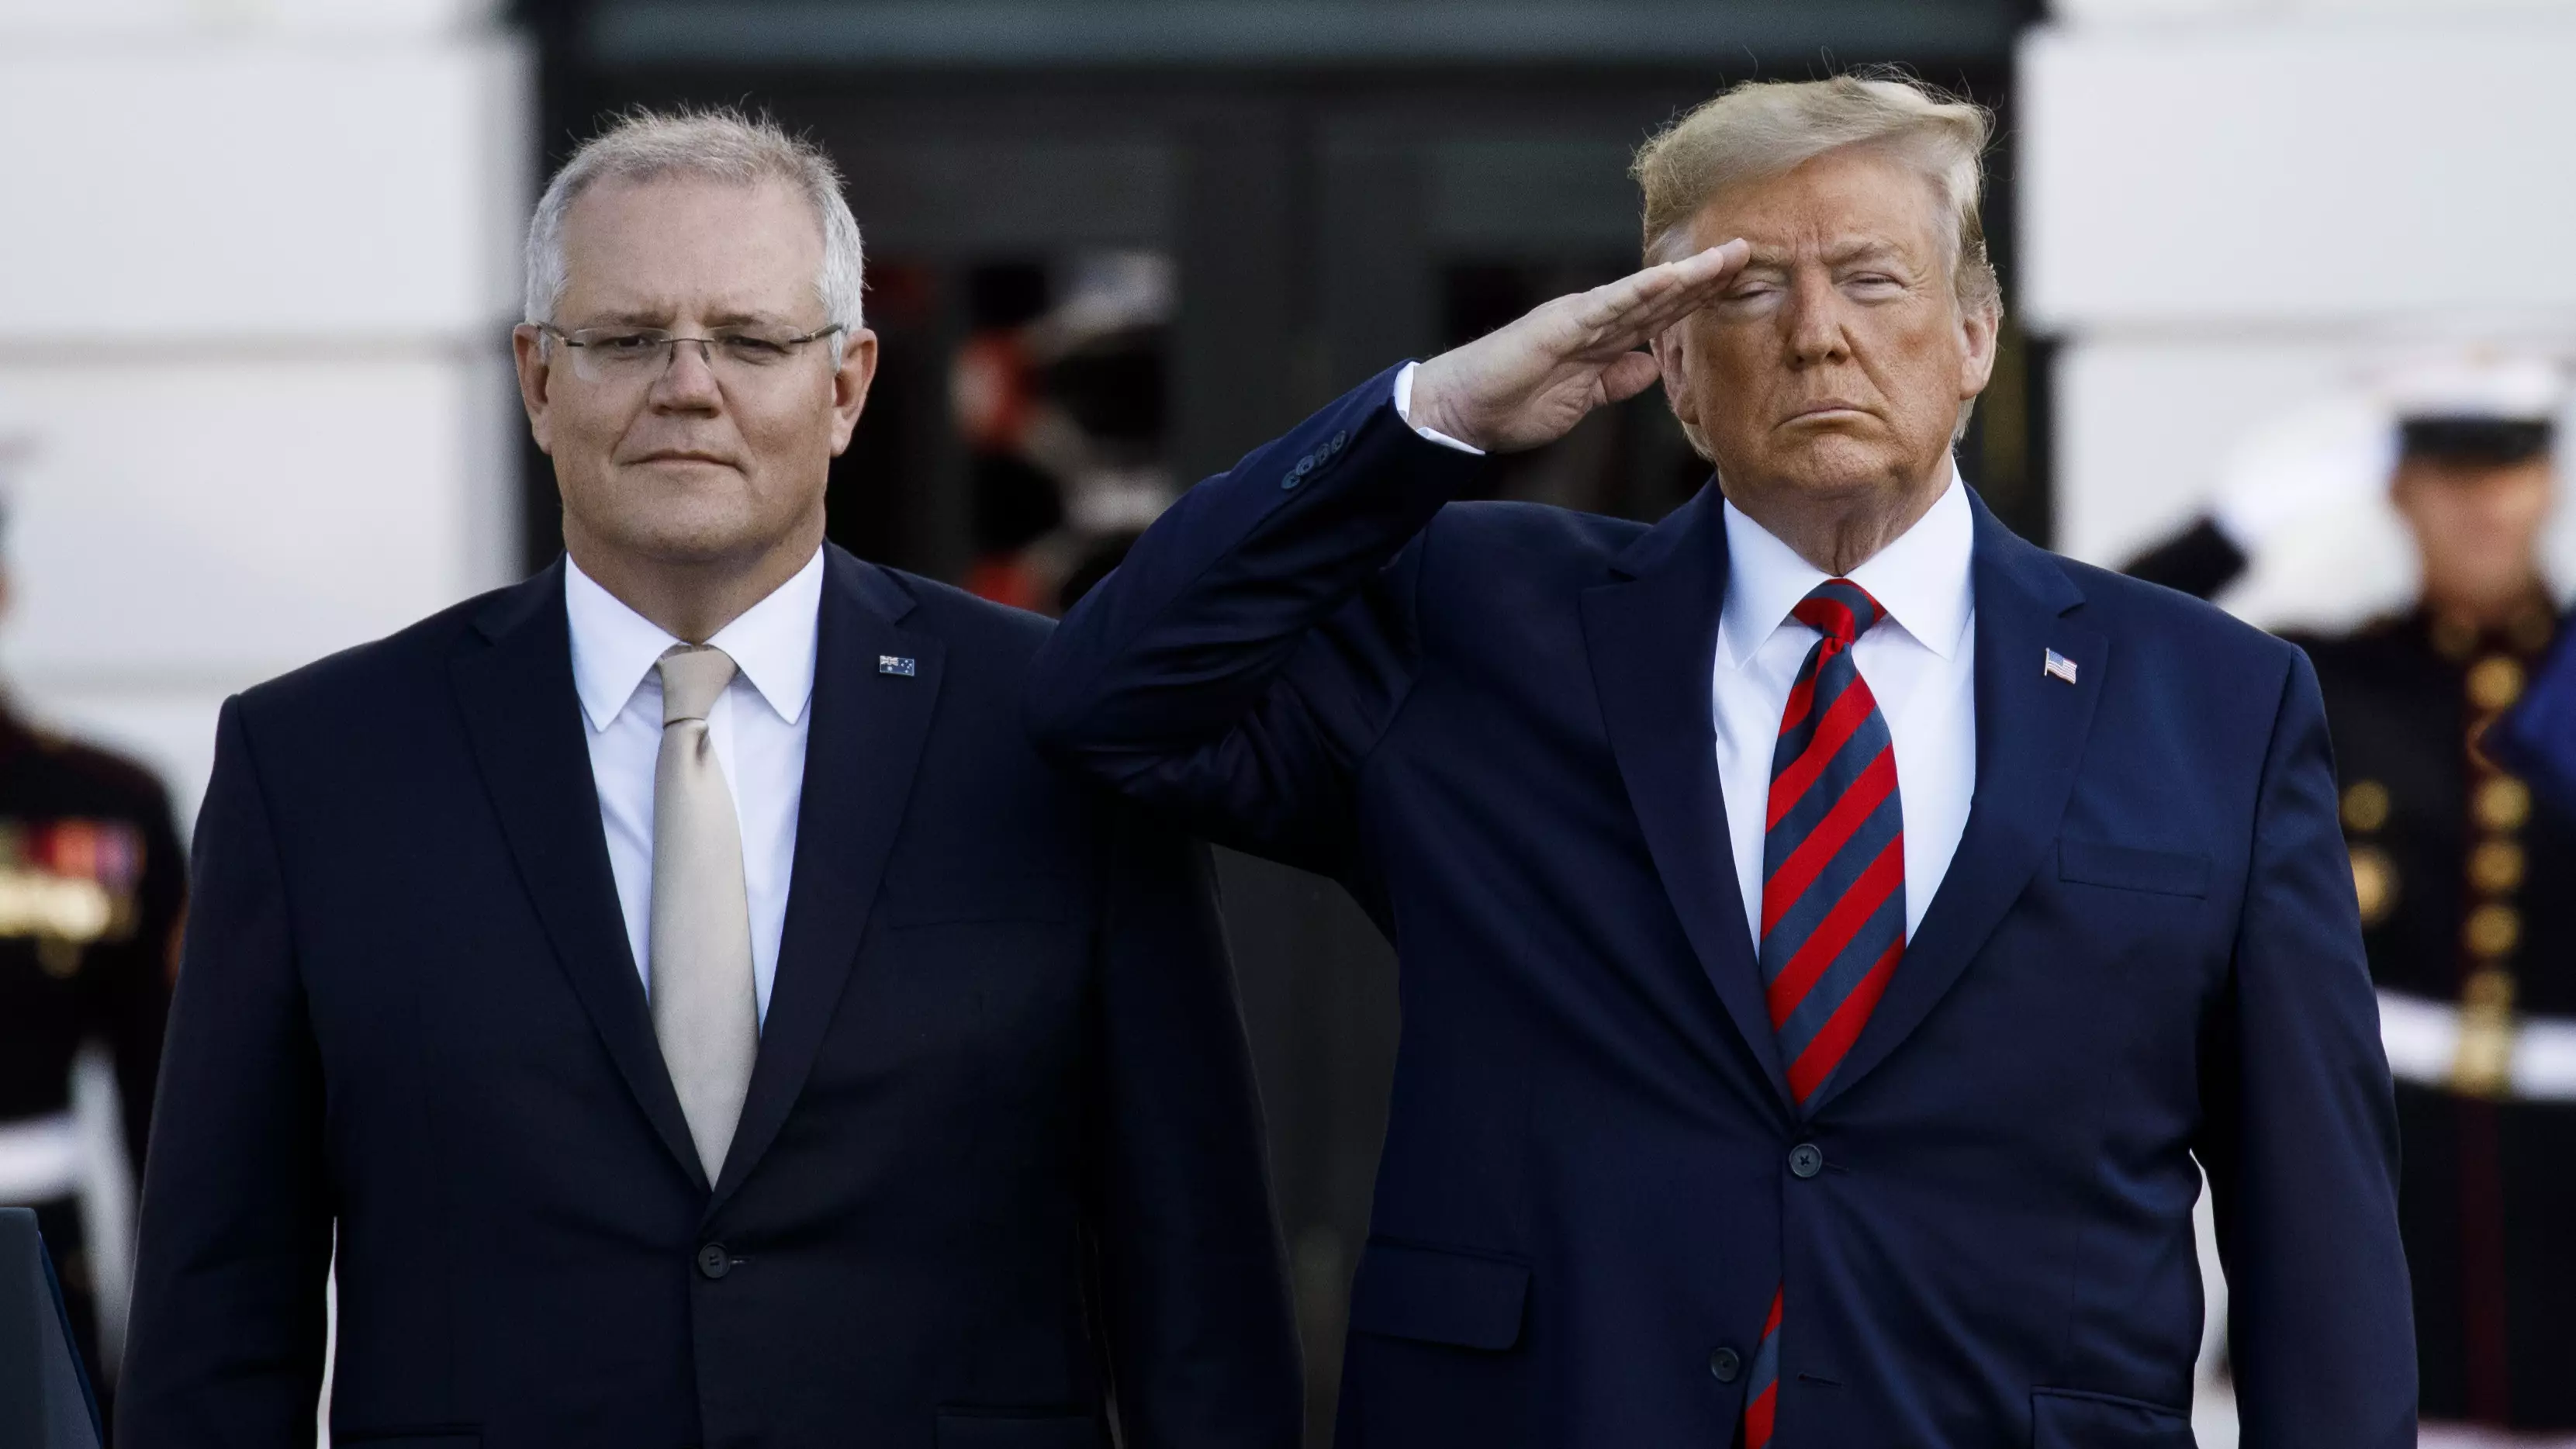 Donald Trump Awards Scott Morrison With One Of The Highest Military Honours